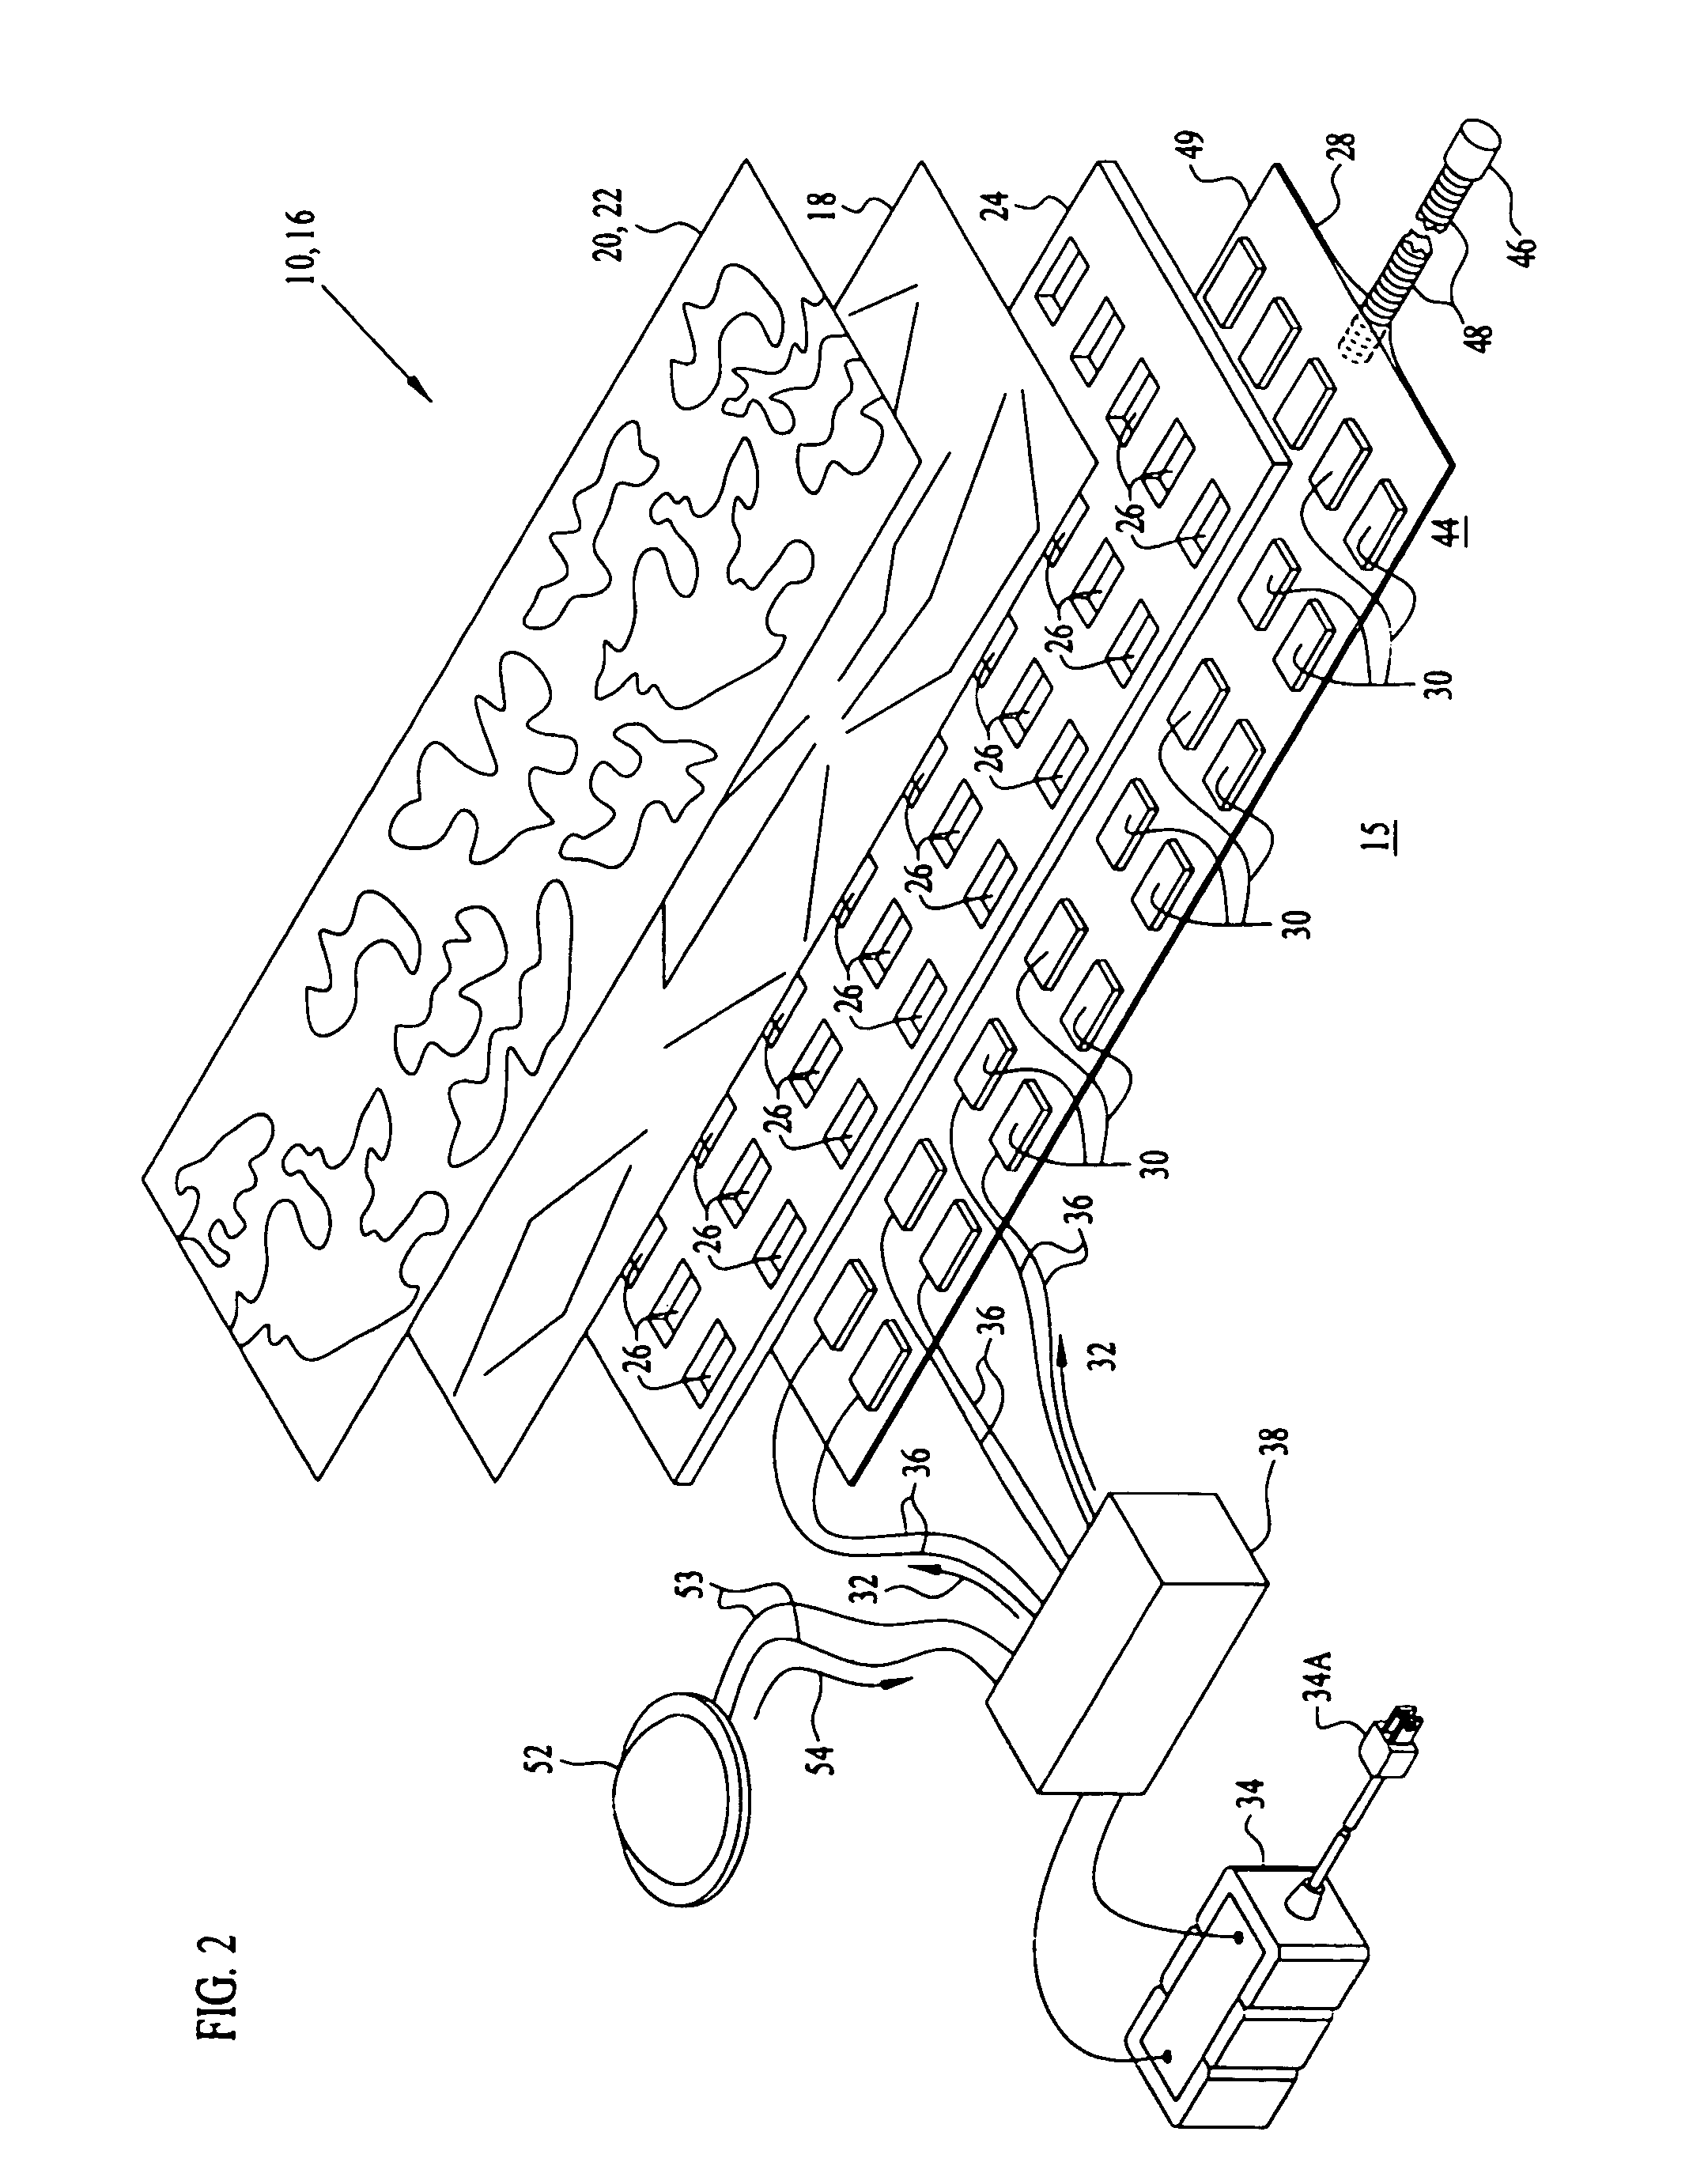 Personal portable blankets as an infrared shielding device for field activities